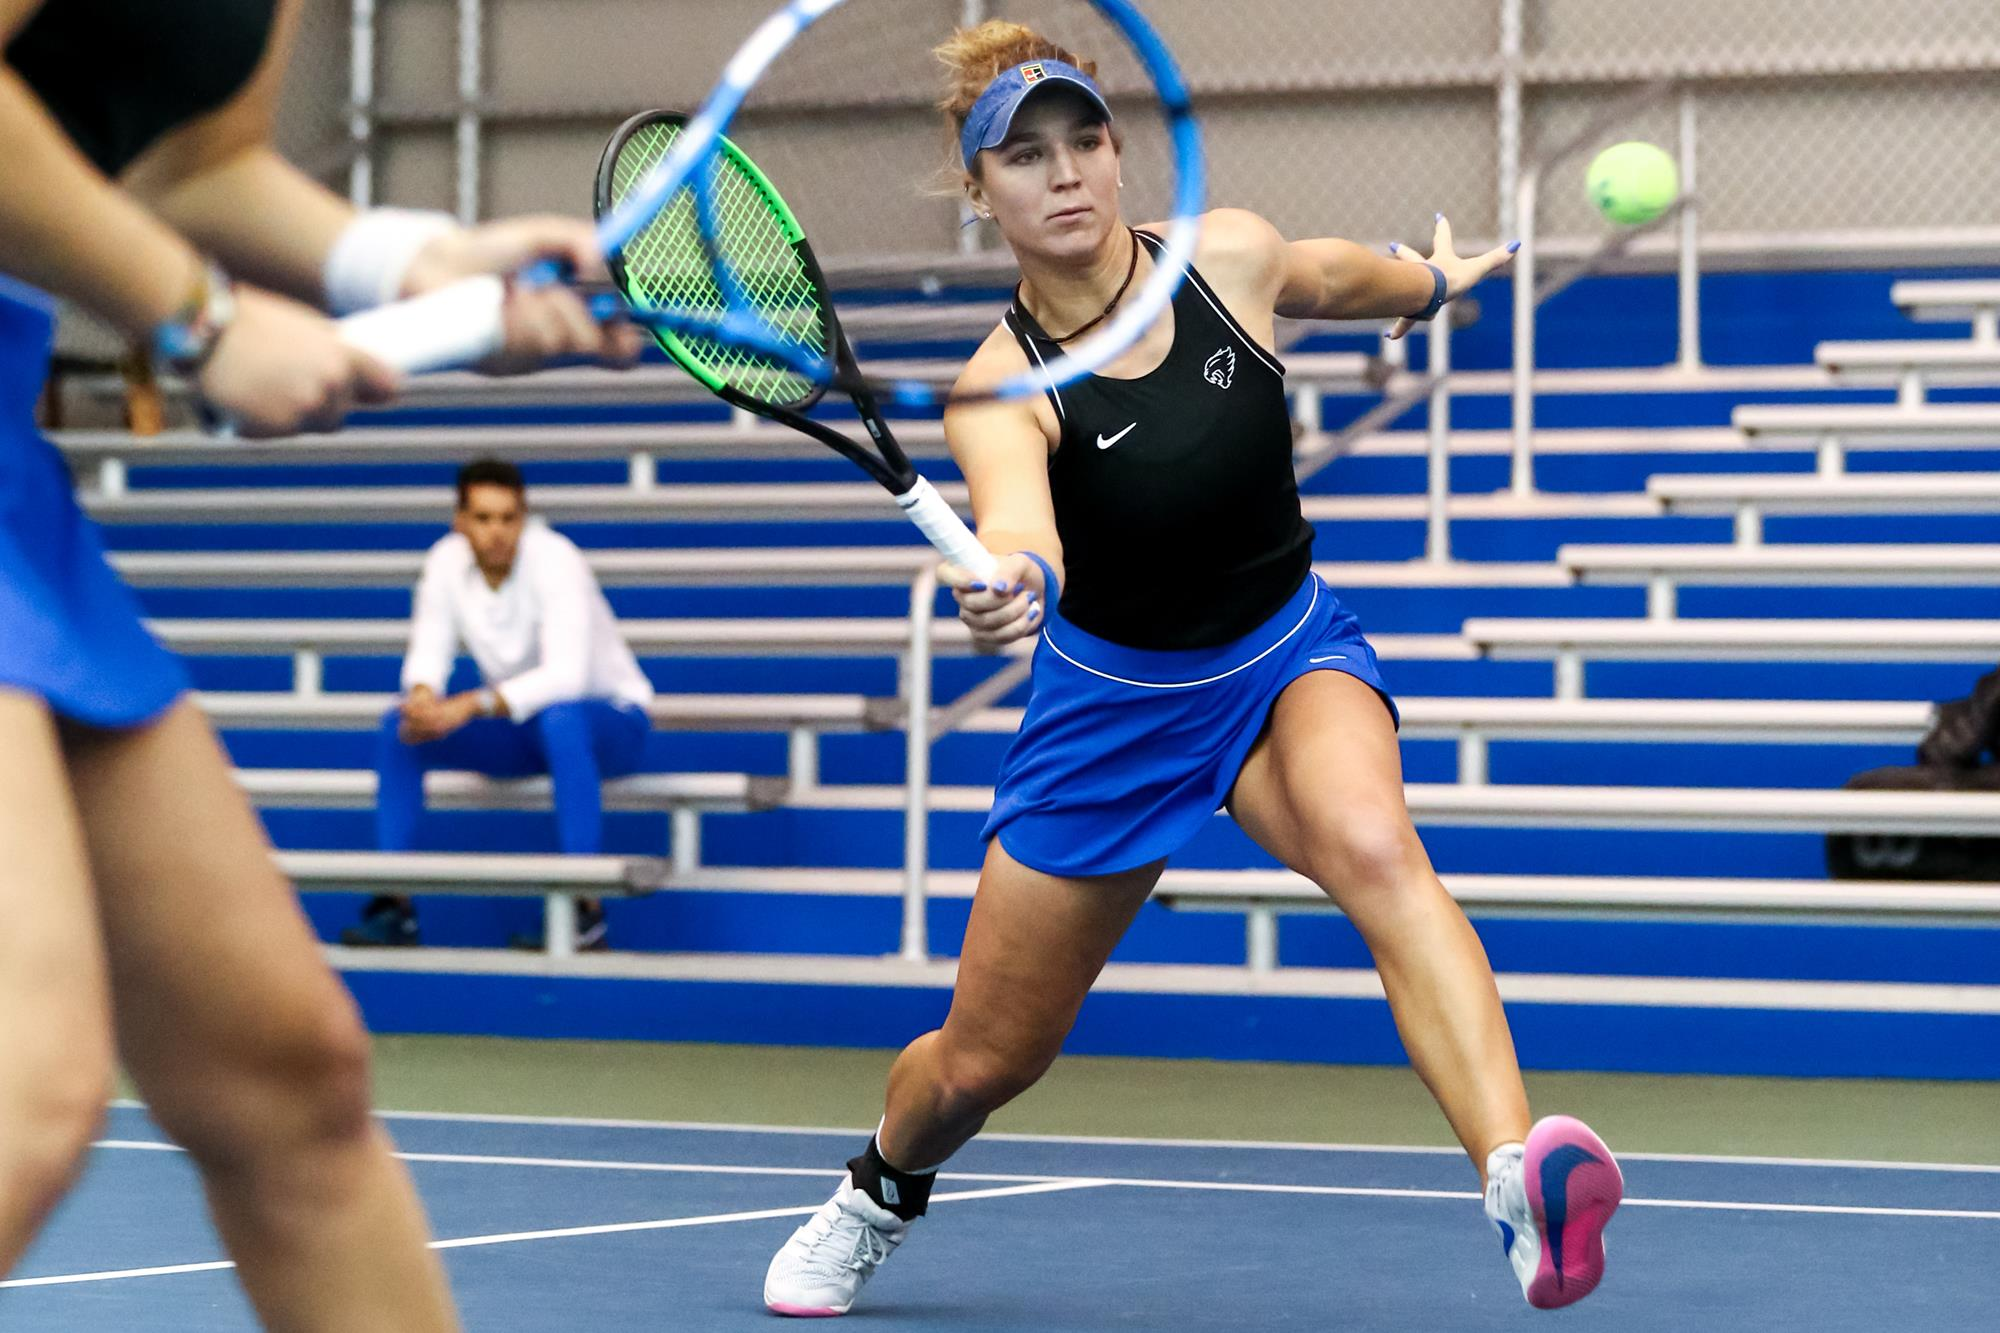 No. 21 Jacobs, Parazinskaite Back on Scene, Win First Doubles Match of Season